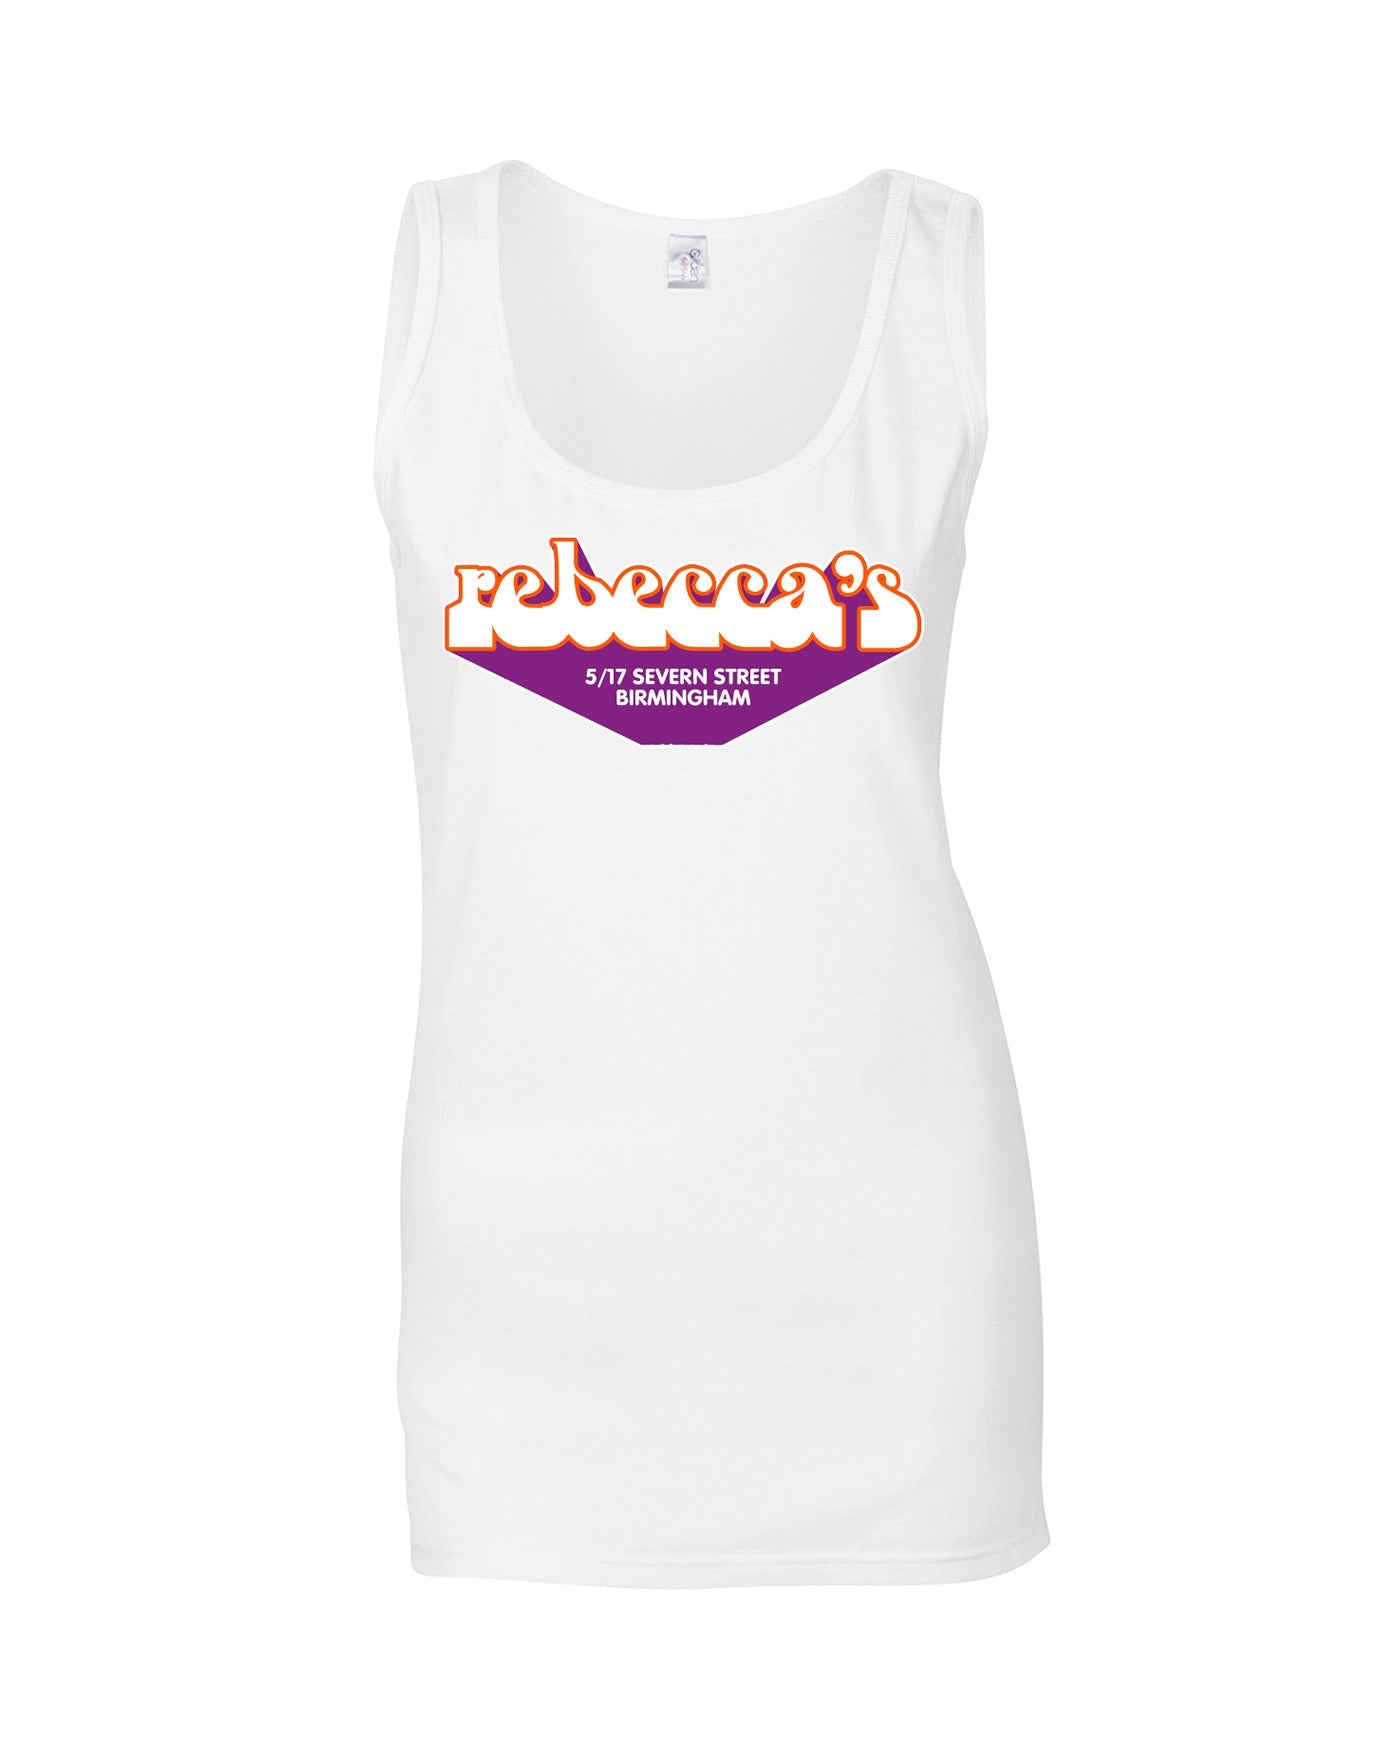 Rebecca's ladies fit vest - various colours - Dirty Stop Outs